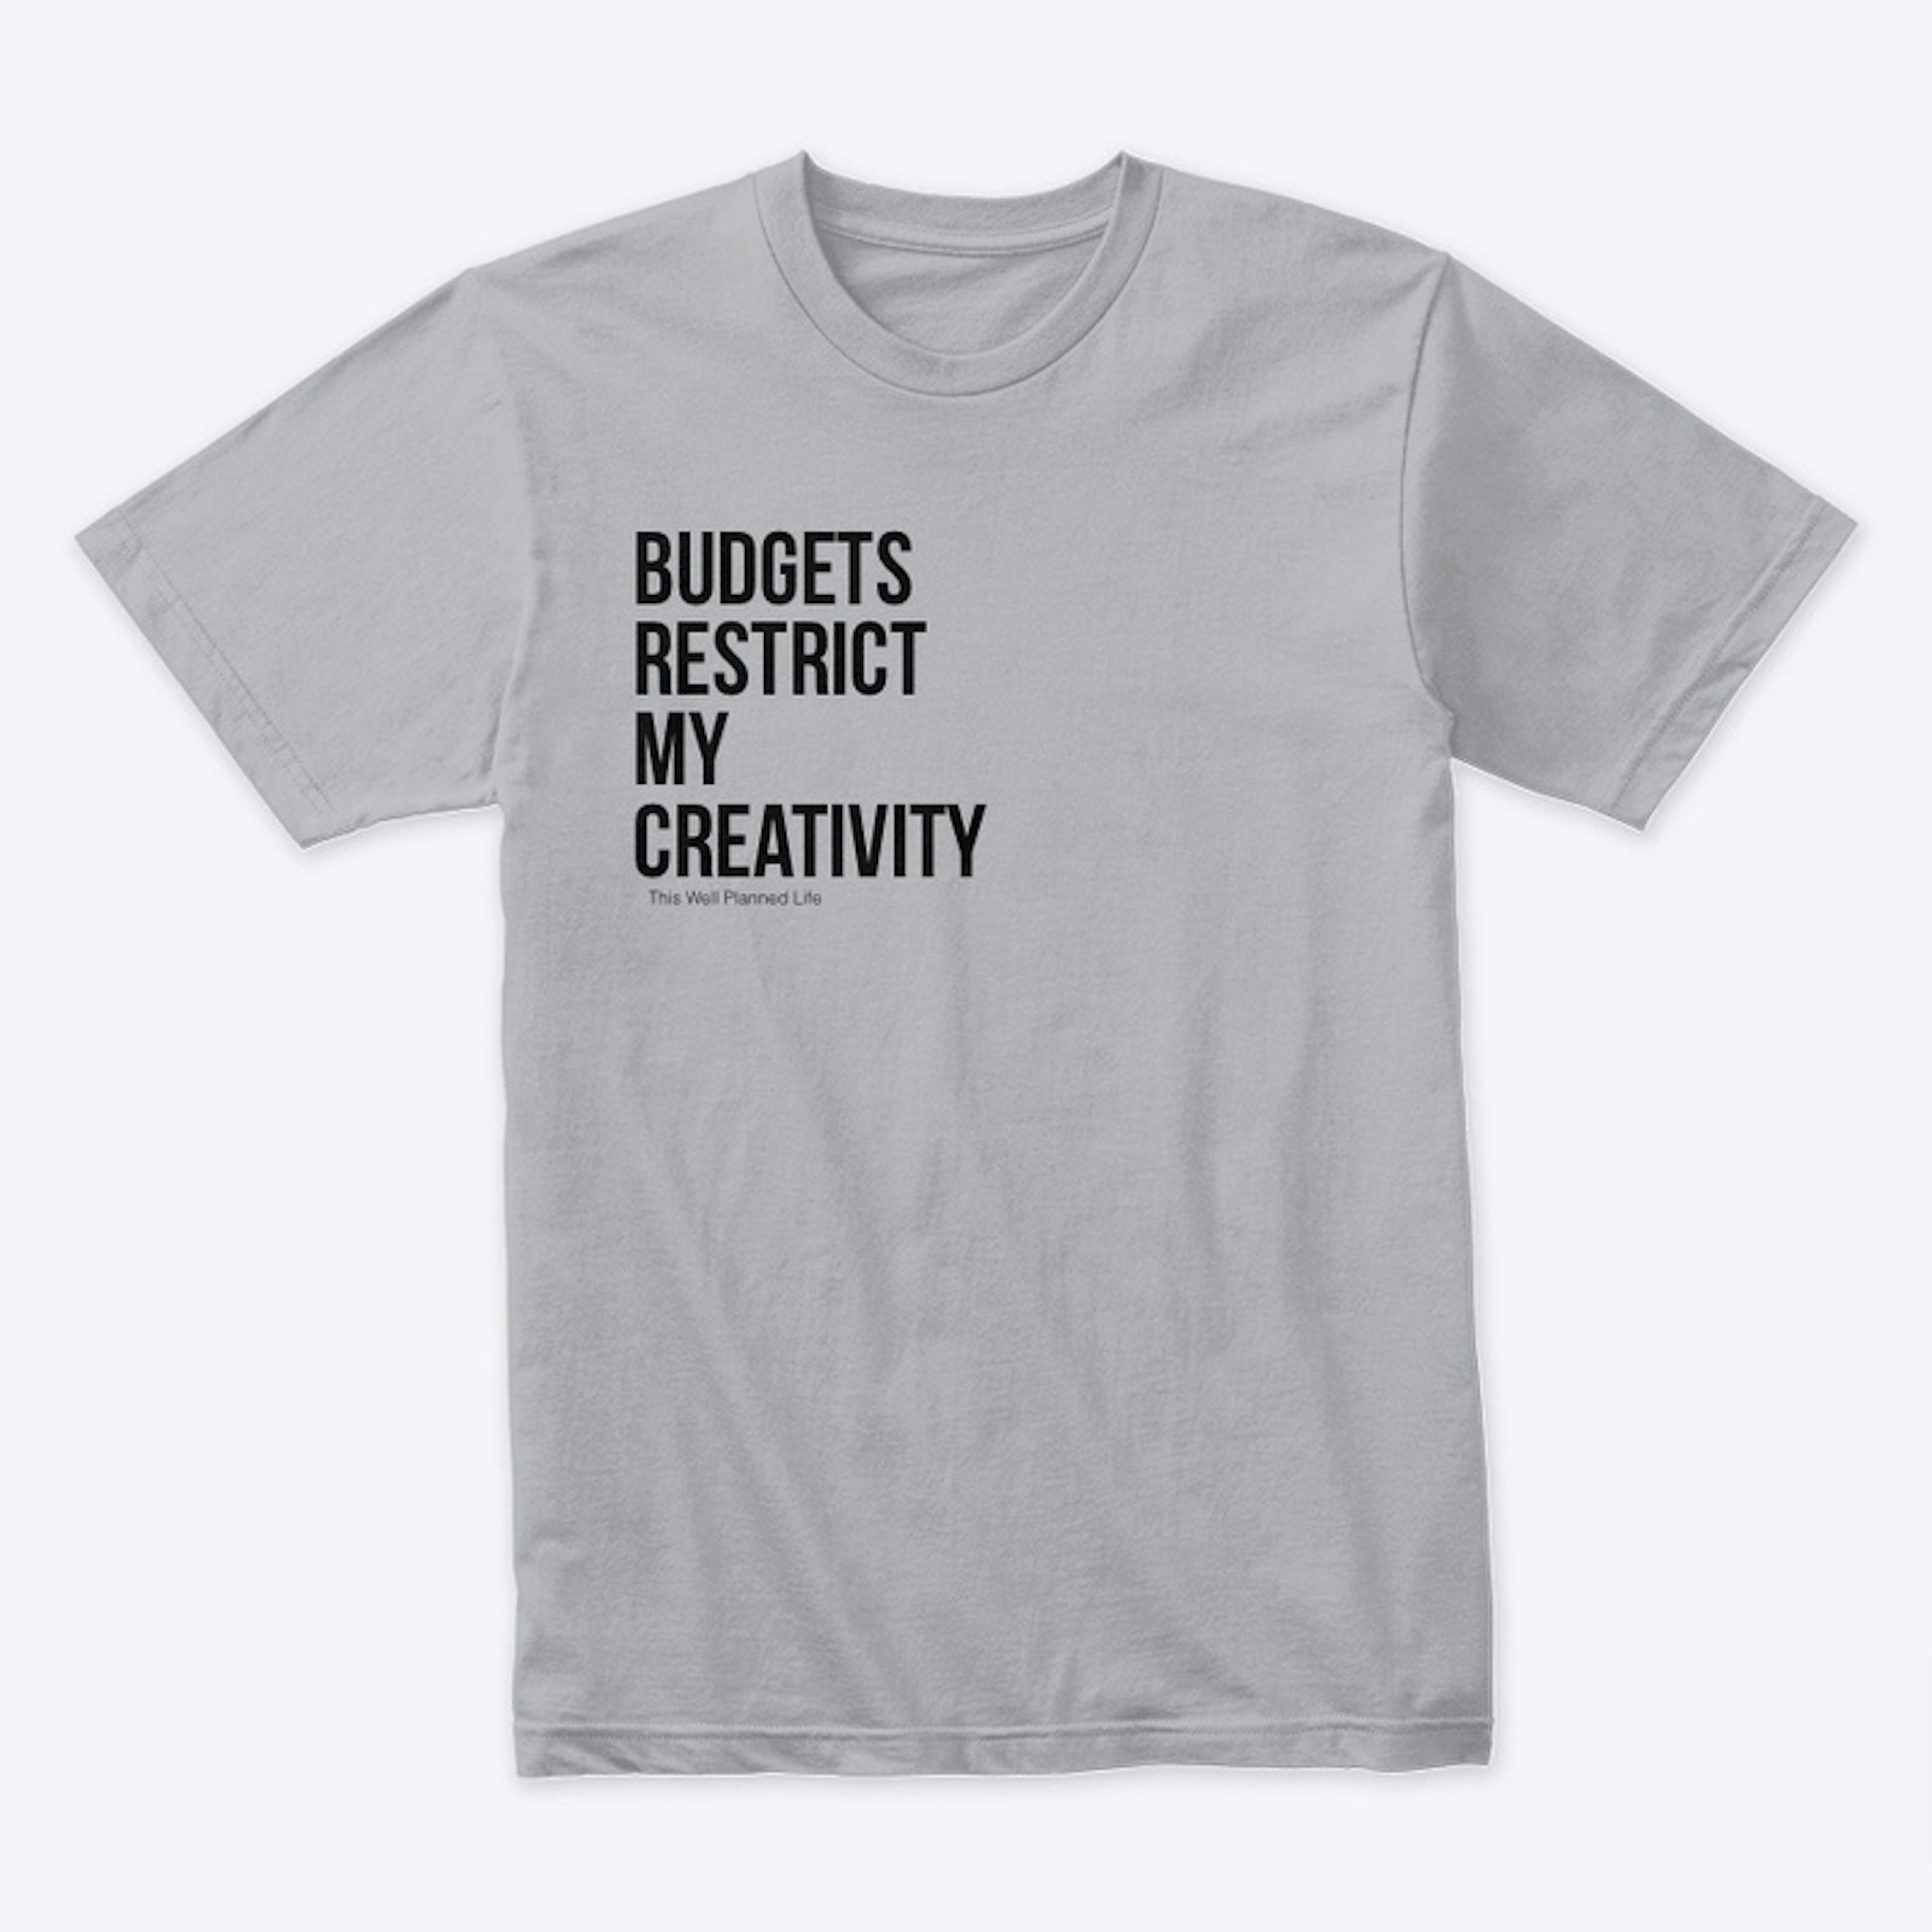 Budgets Restrict (White, Gray, Pink)